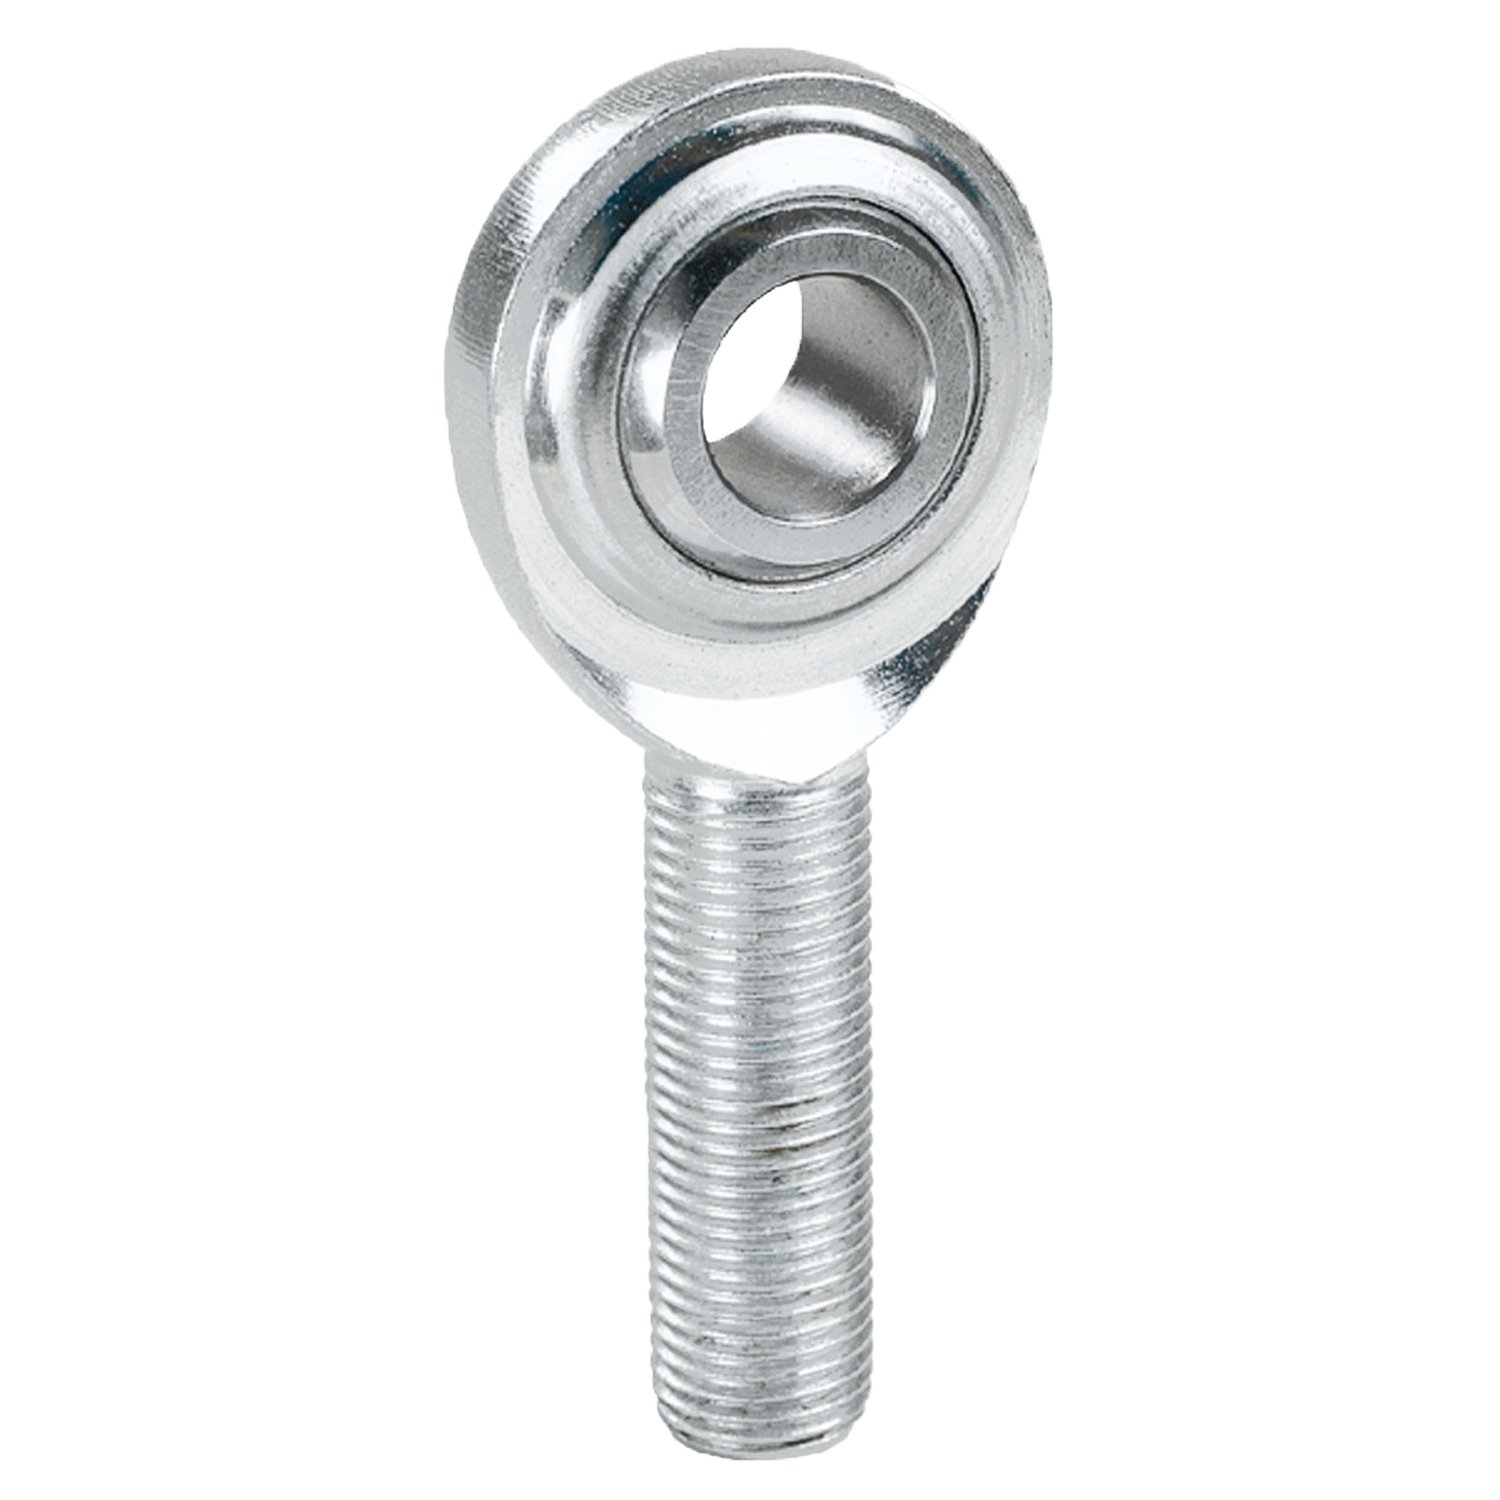 MGM-T Series Stainless Steel Rod End Hole I.D.: